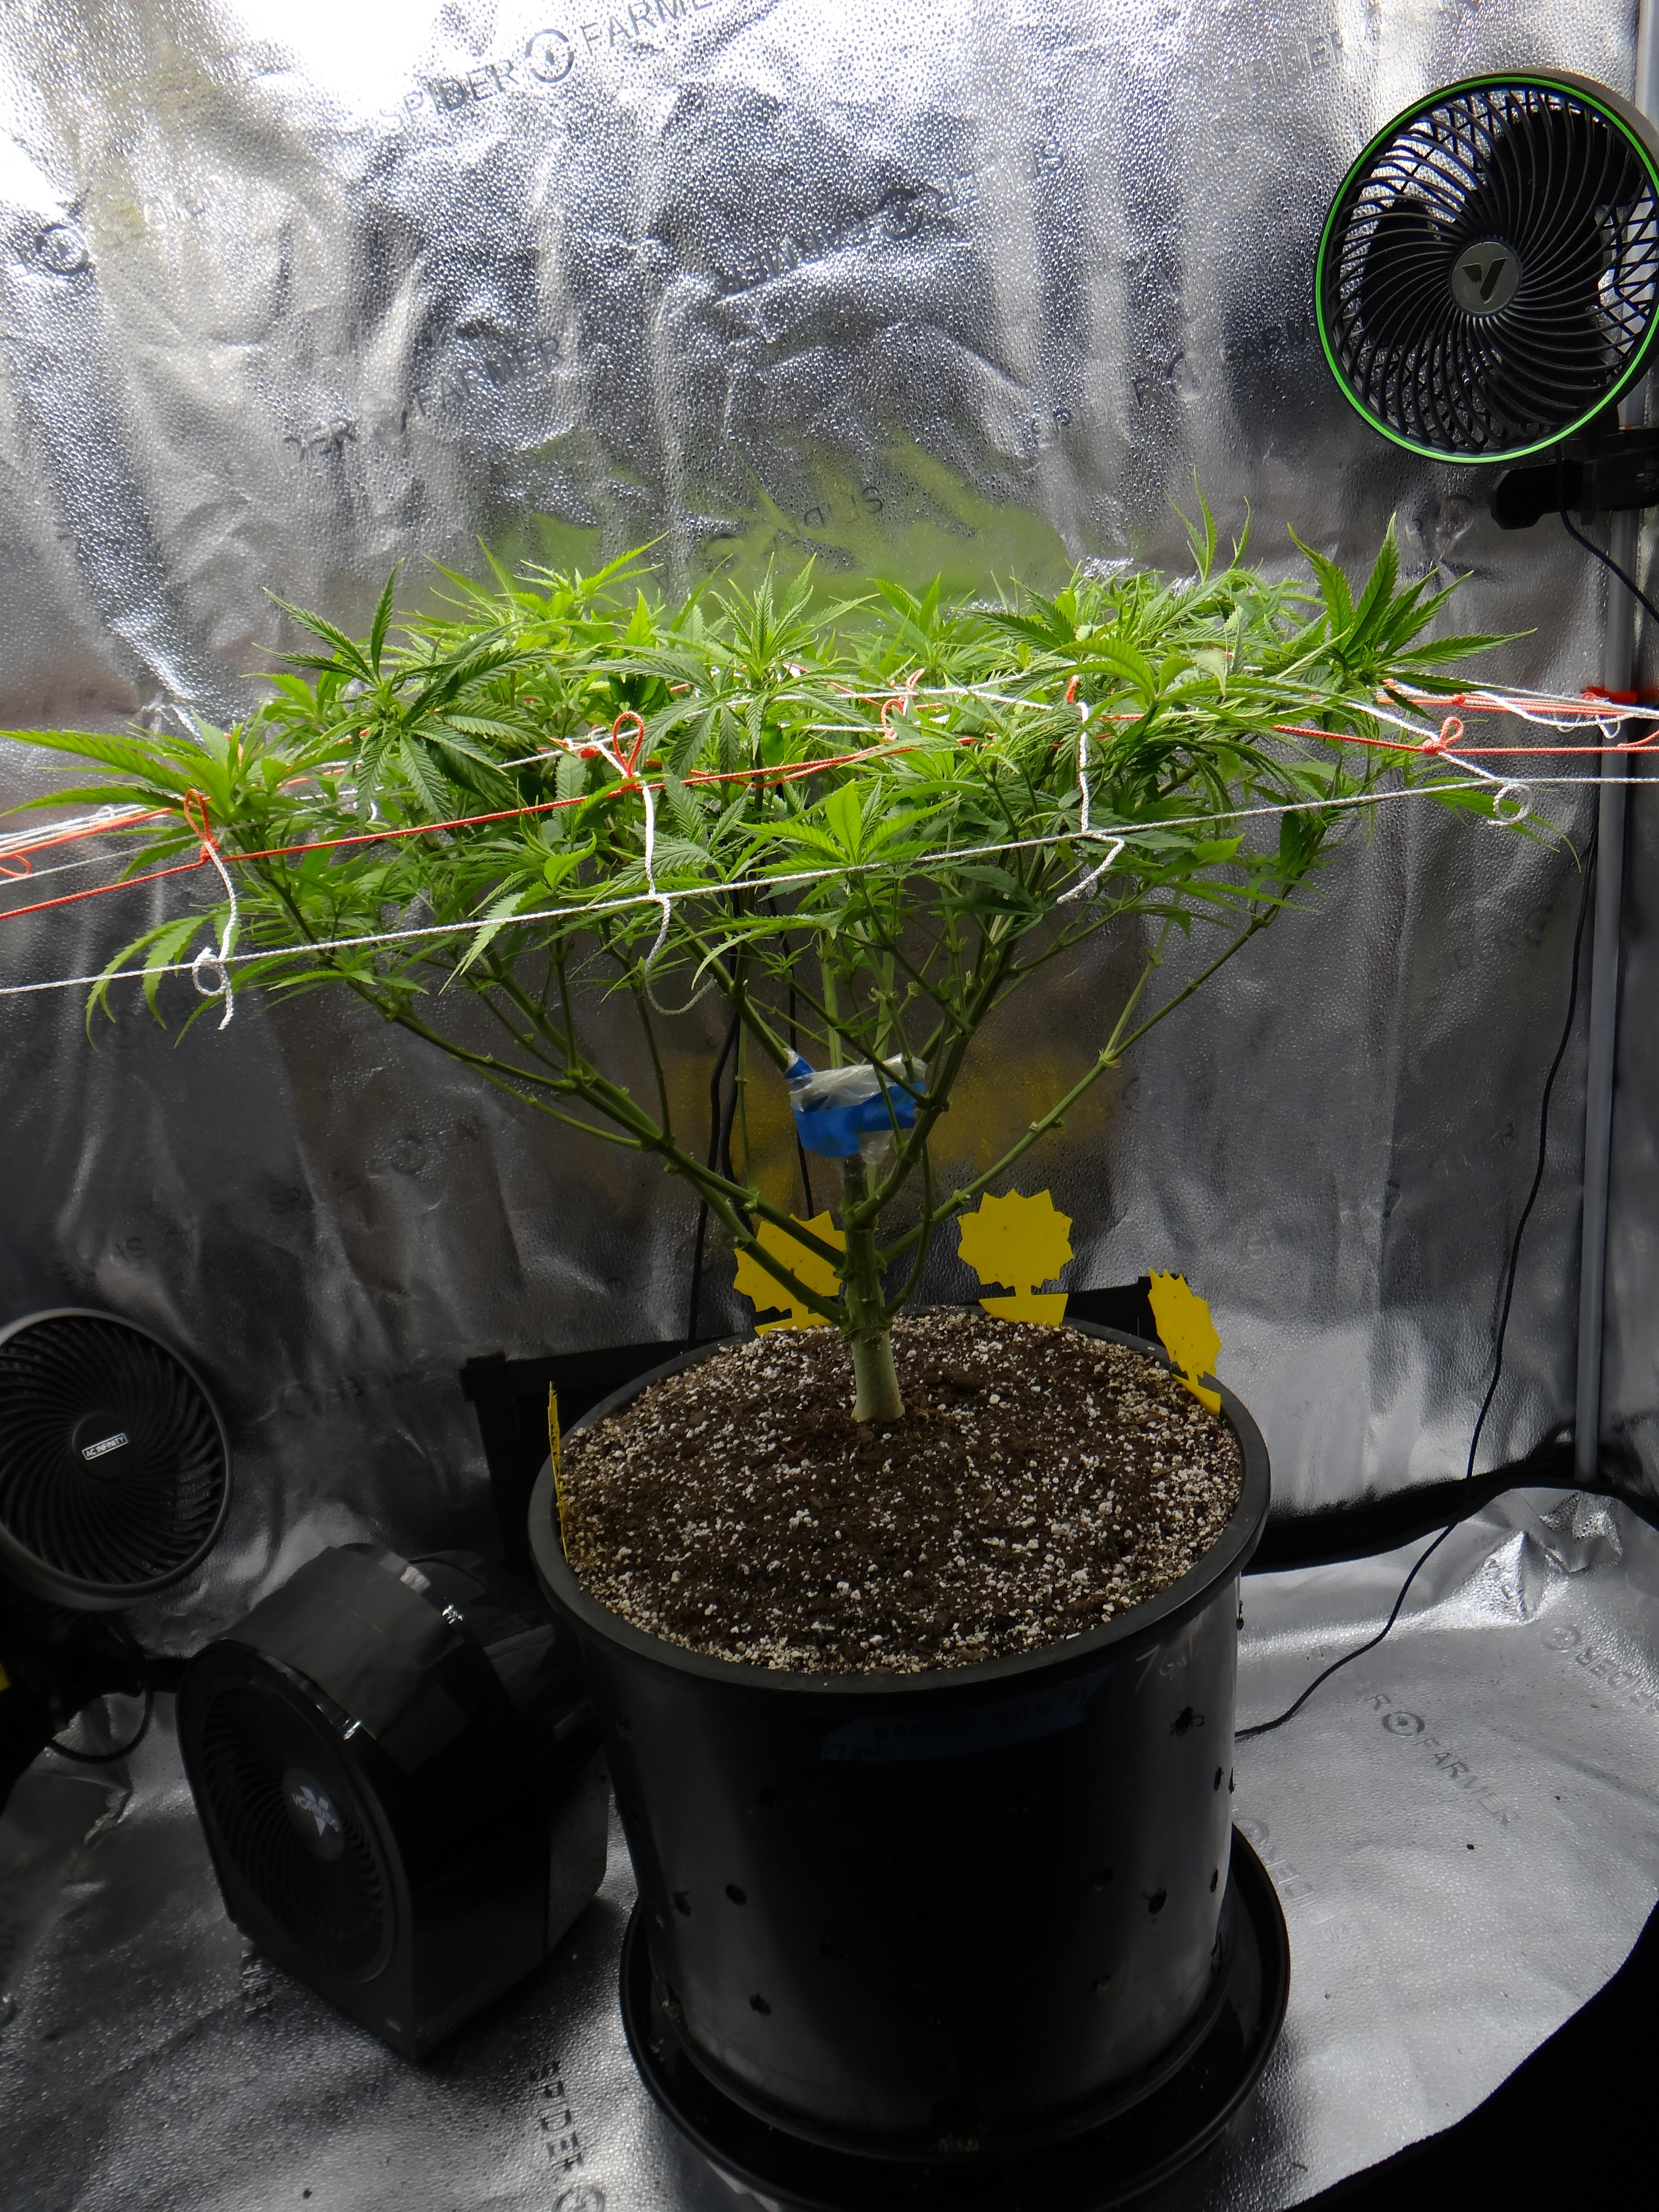 Orange Bud trimmed up. You can see the trunk repair now